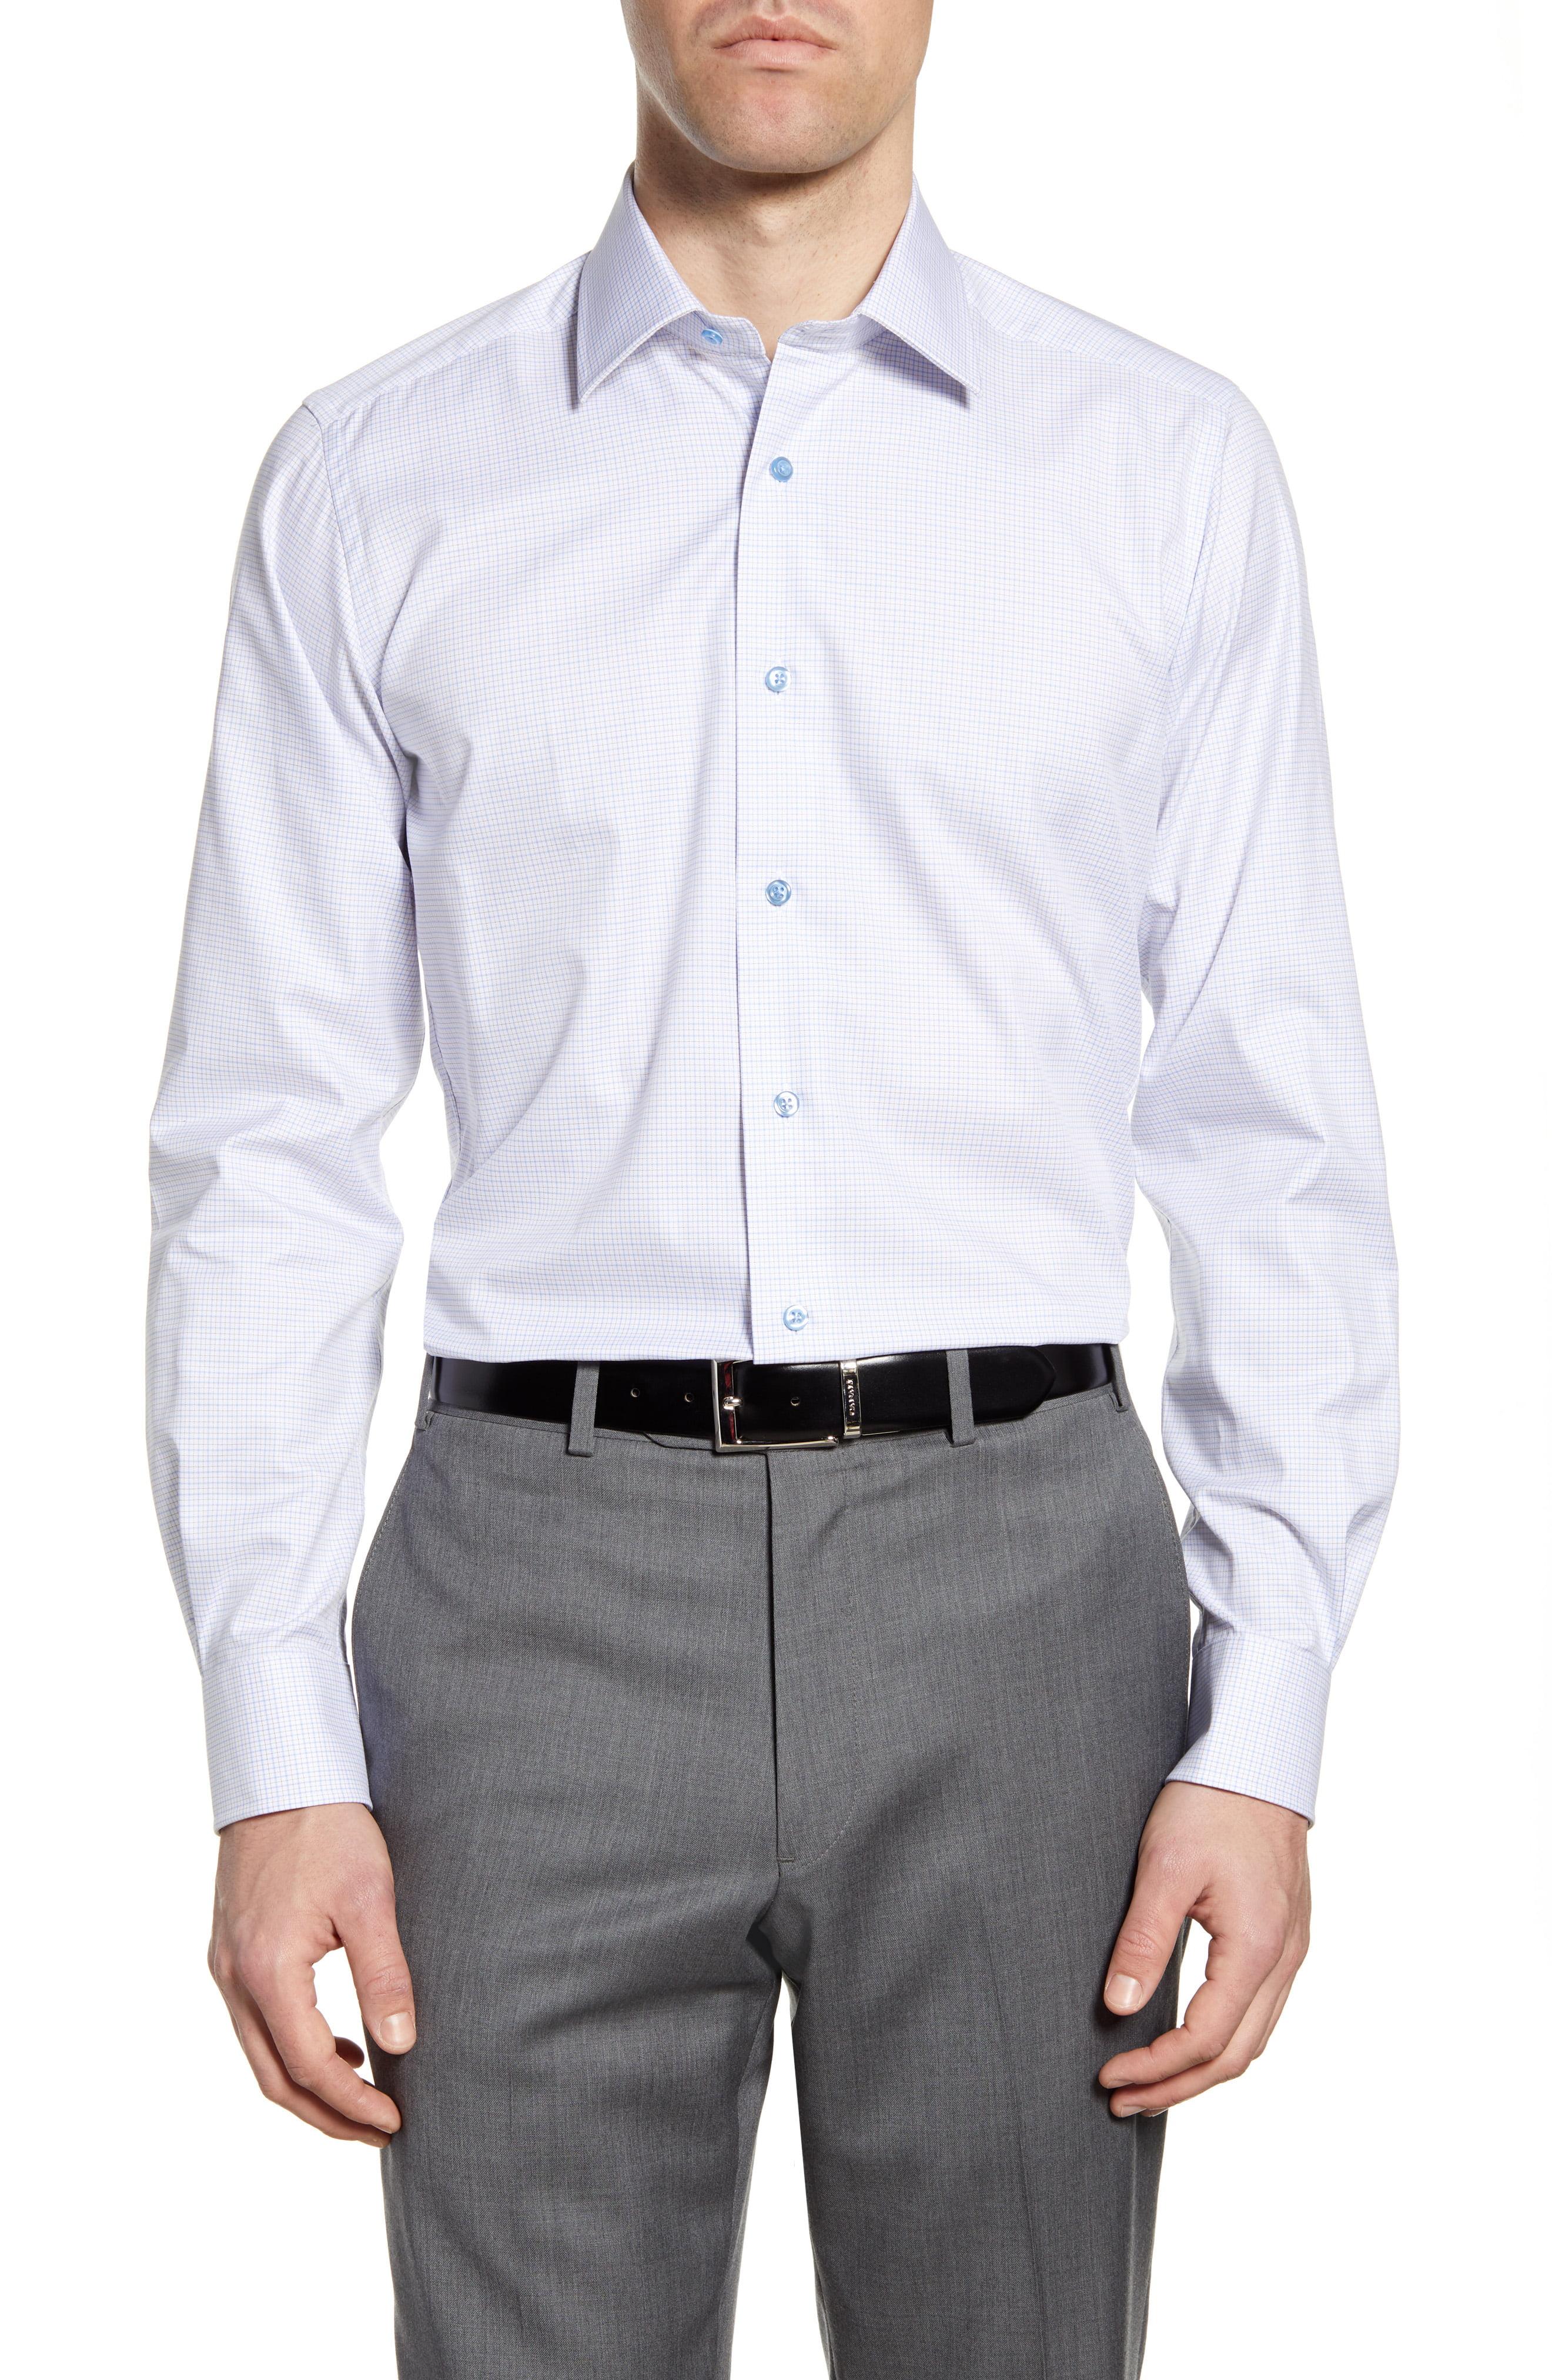 David Donahue Trim Fit Check Dress Shirt in White for Men - Lyst